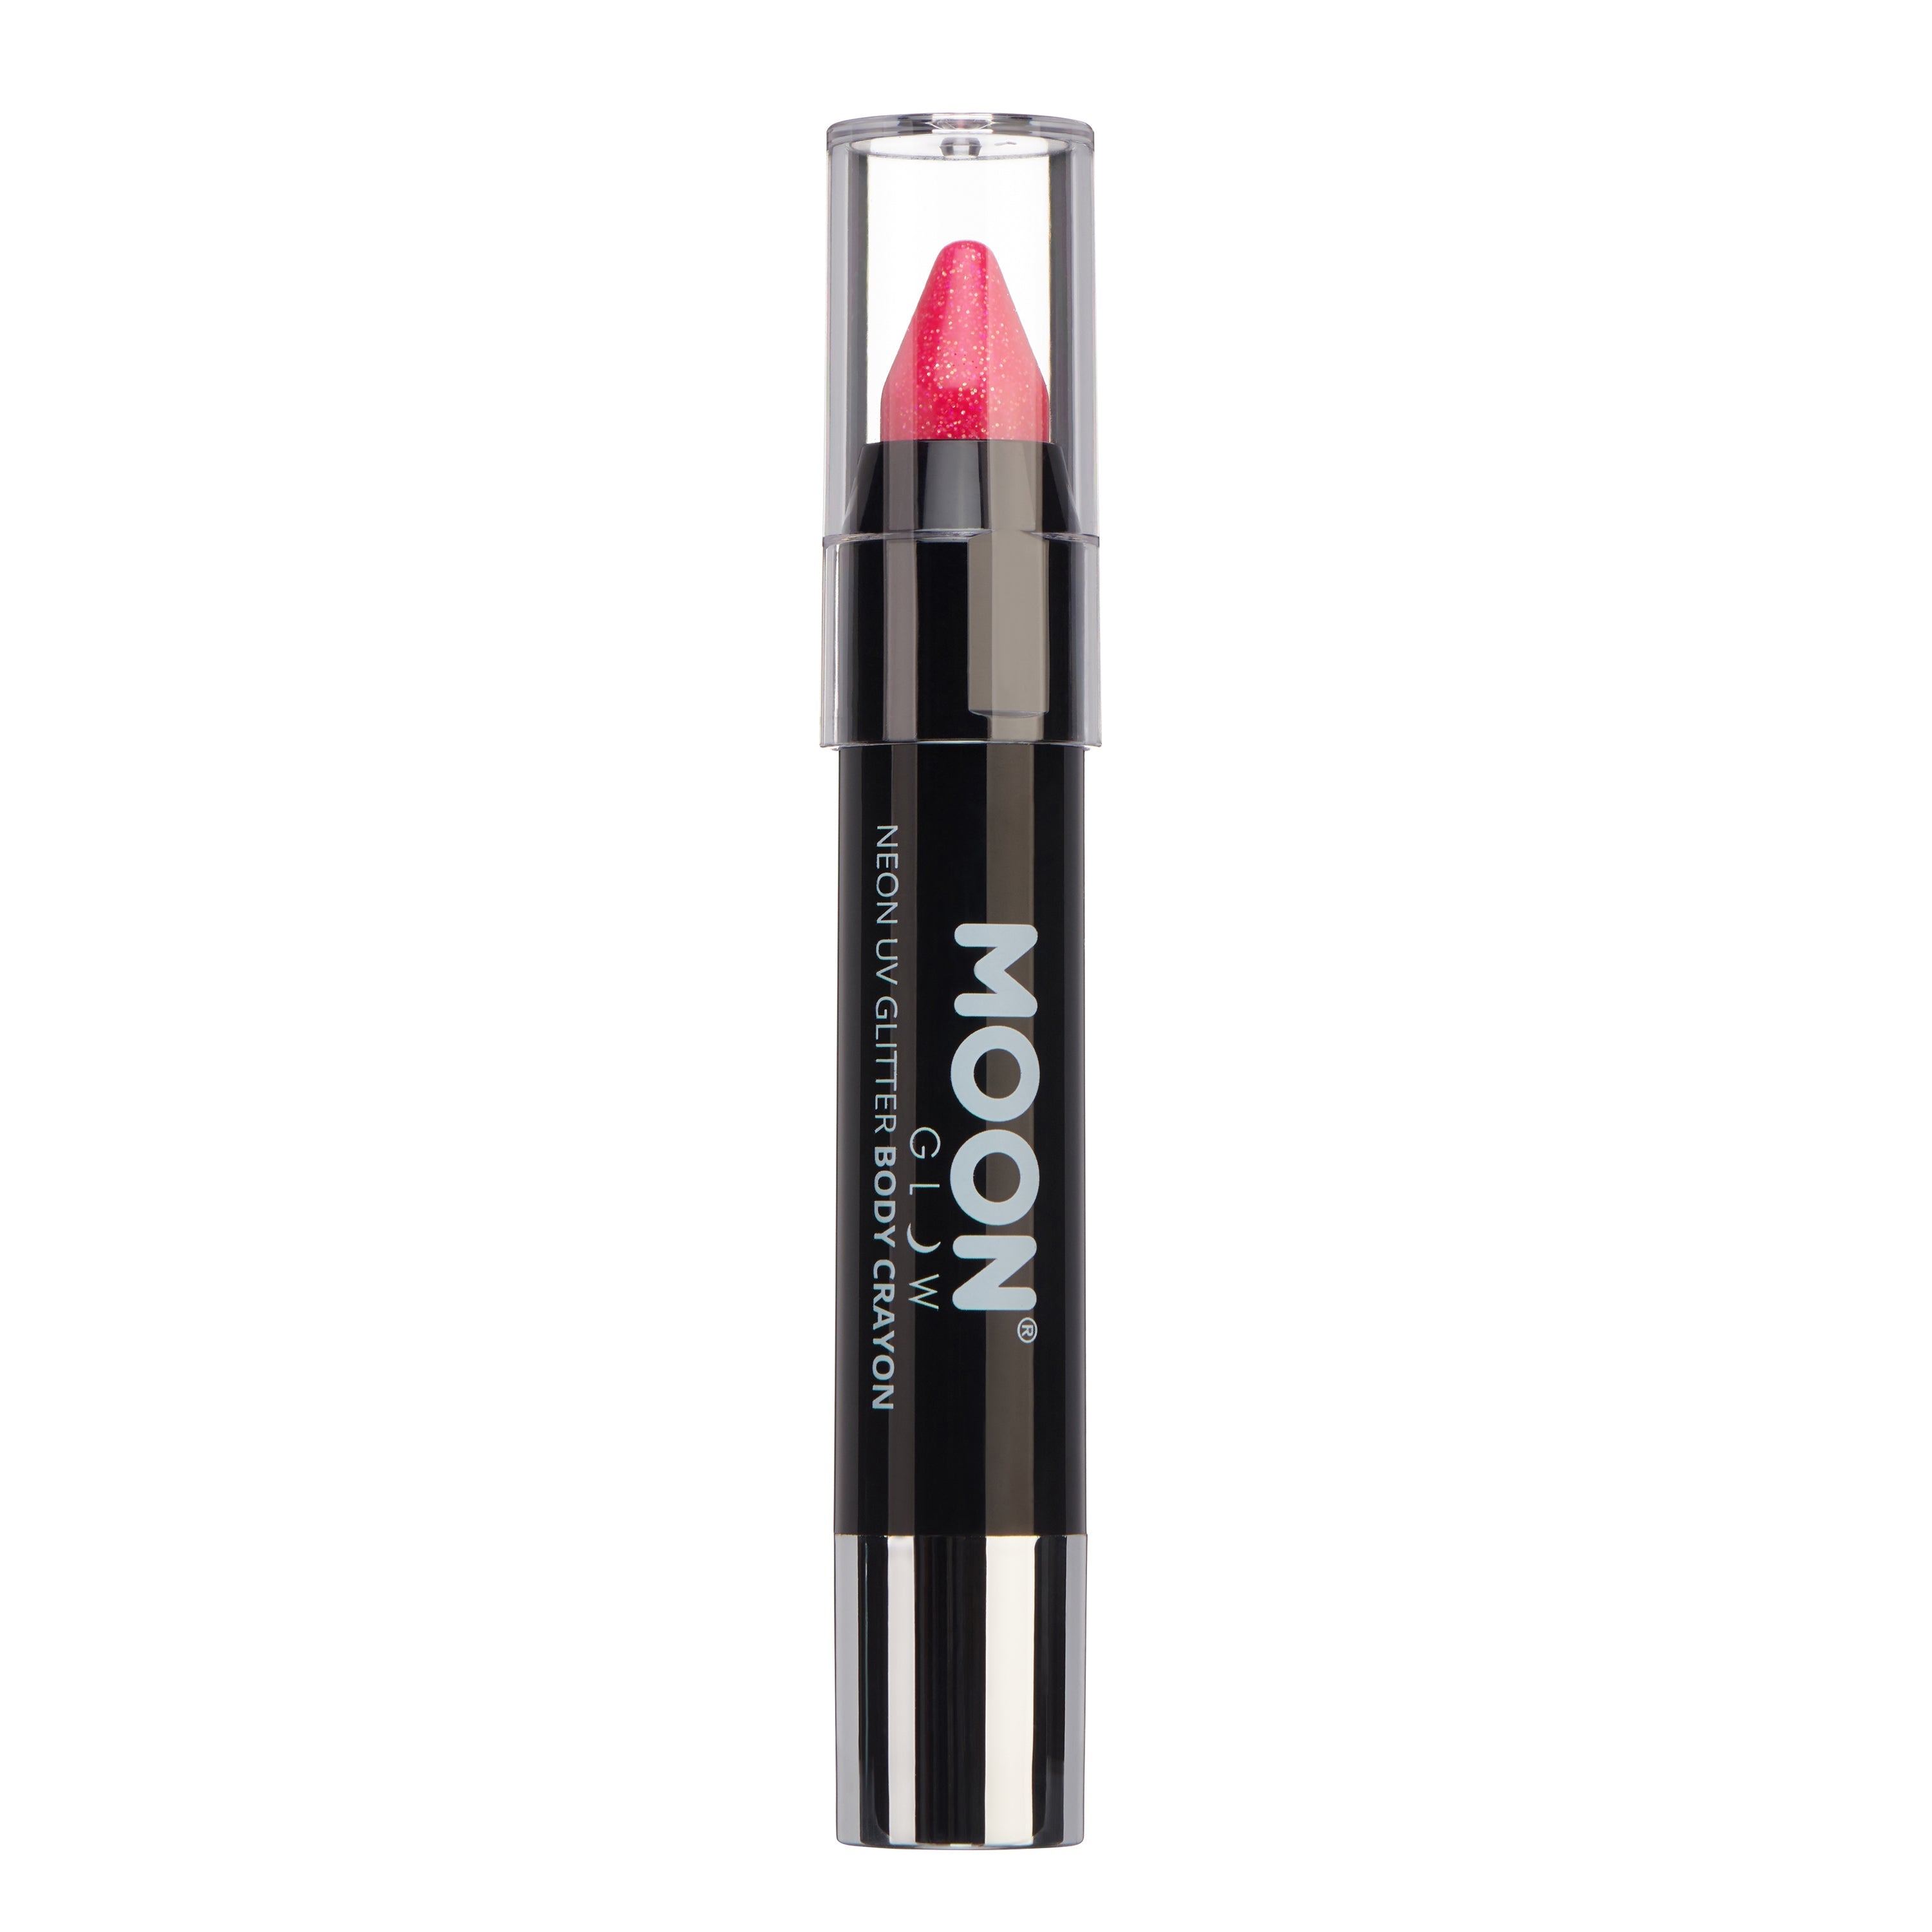 Hot Pink - Neon UV Glow Blacklight Glitter Face & Body Crayon, 3.5g. Cosmetically certified, FDA & Health Canada compliant and cruelty free.